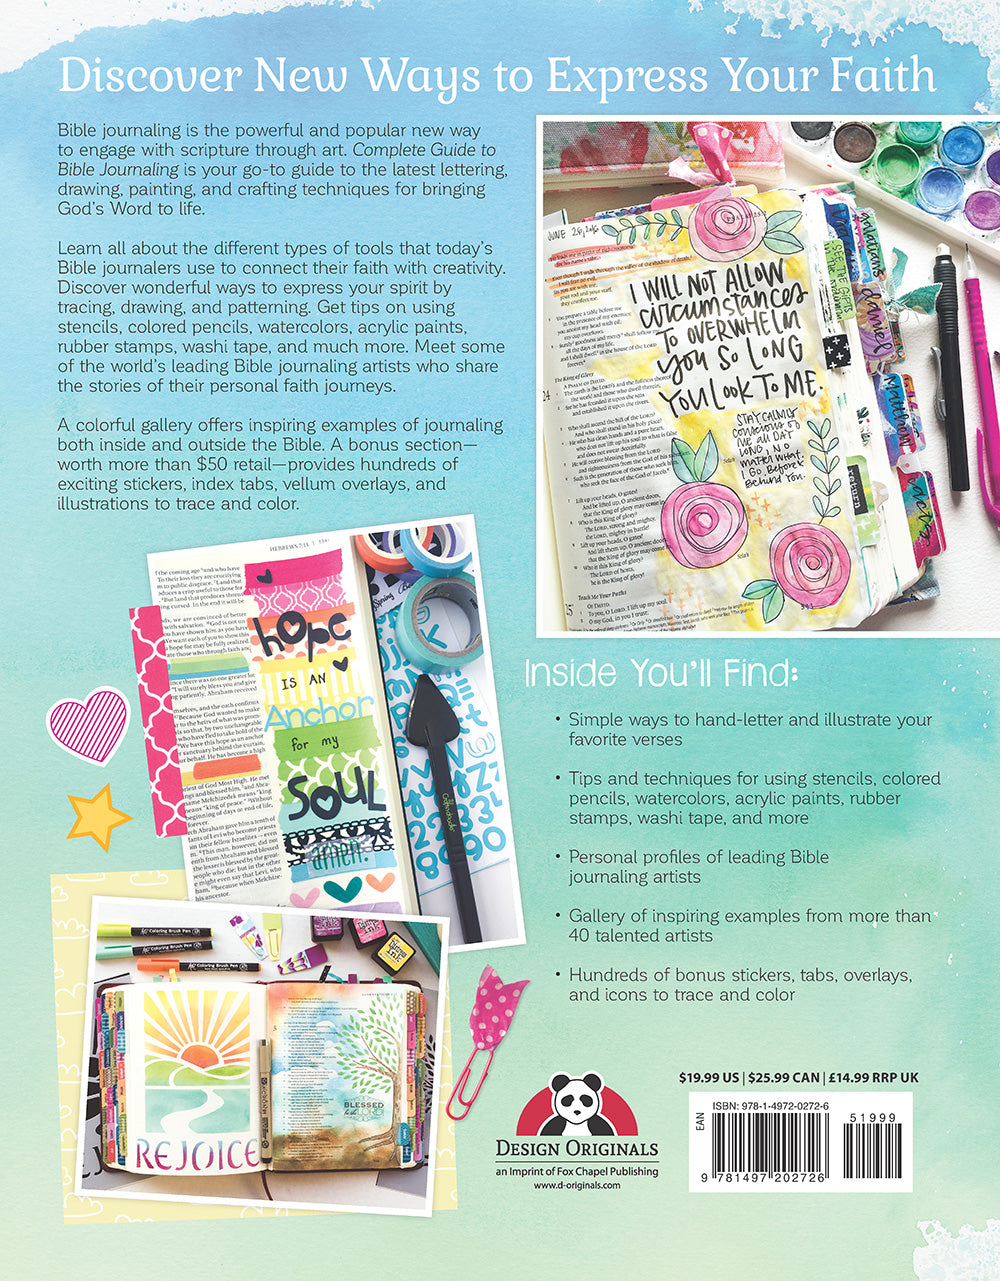  Illustrated Faith - Washi Tape - Chapter and Verse : Arts,  Crafts & Sewing